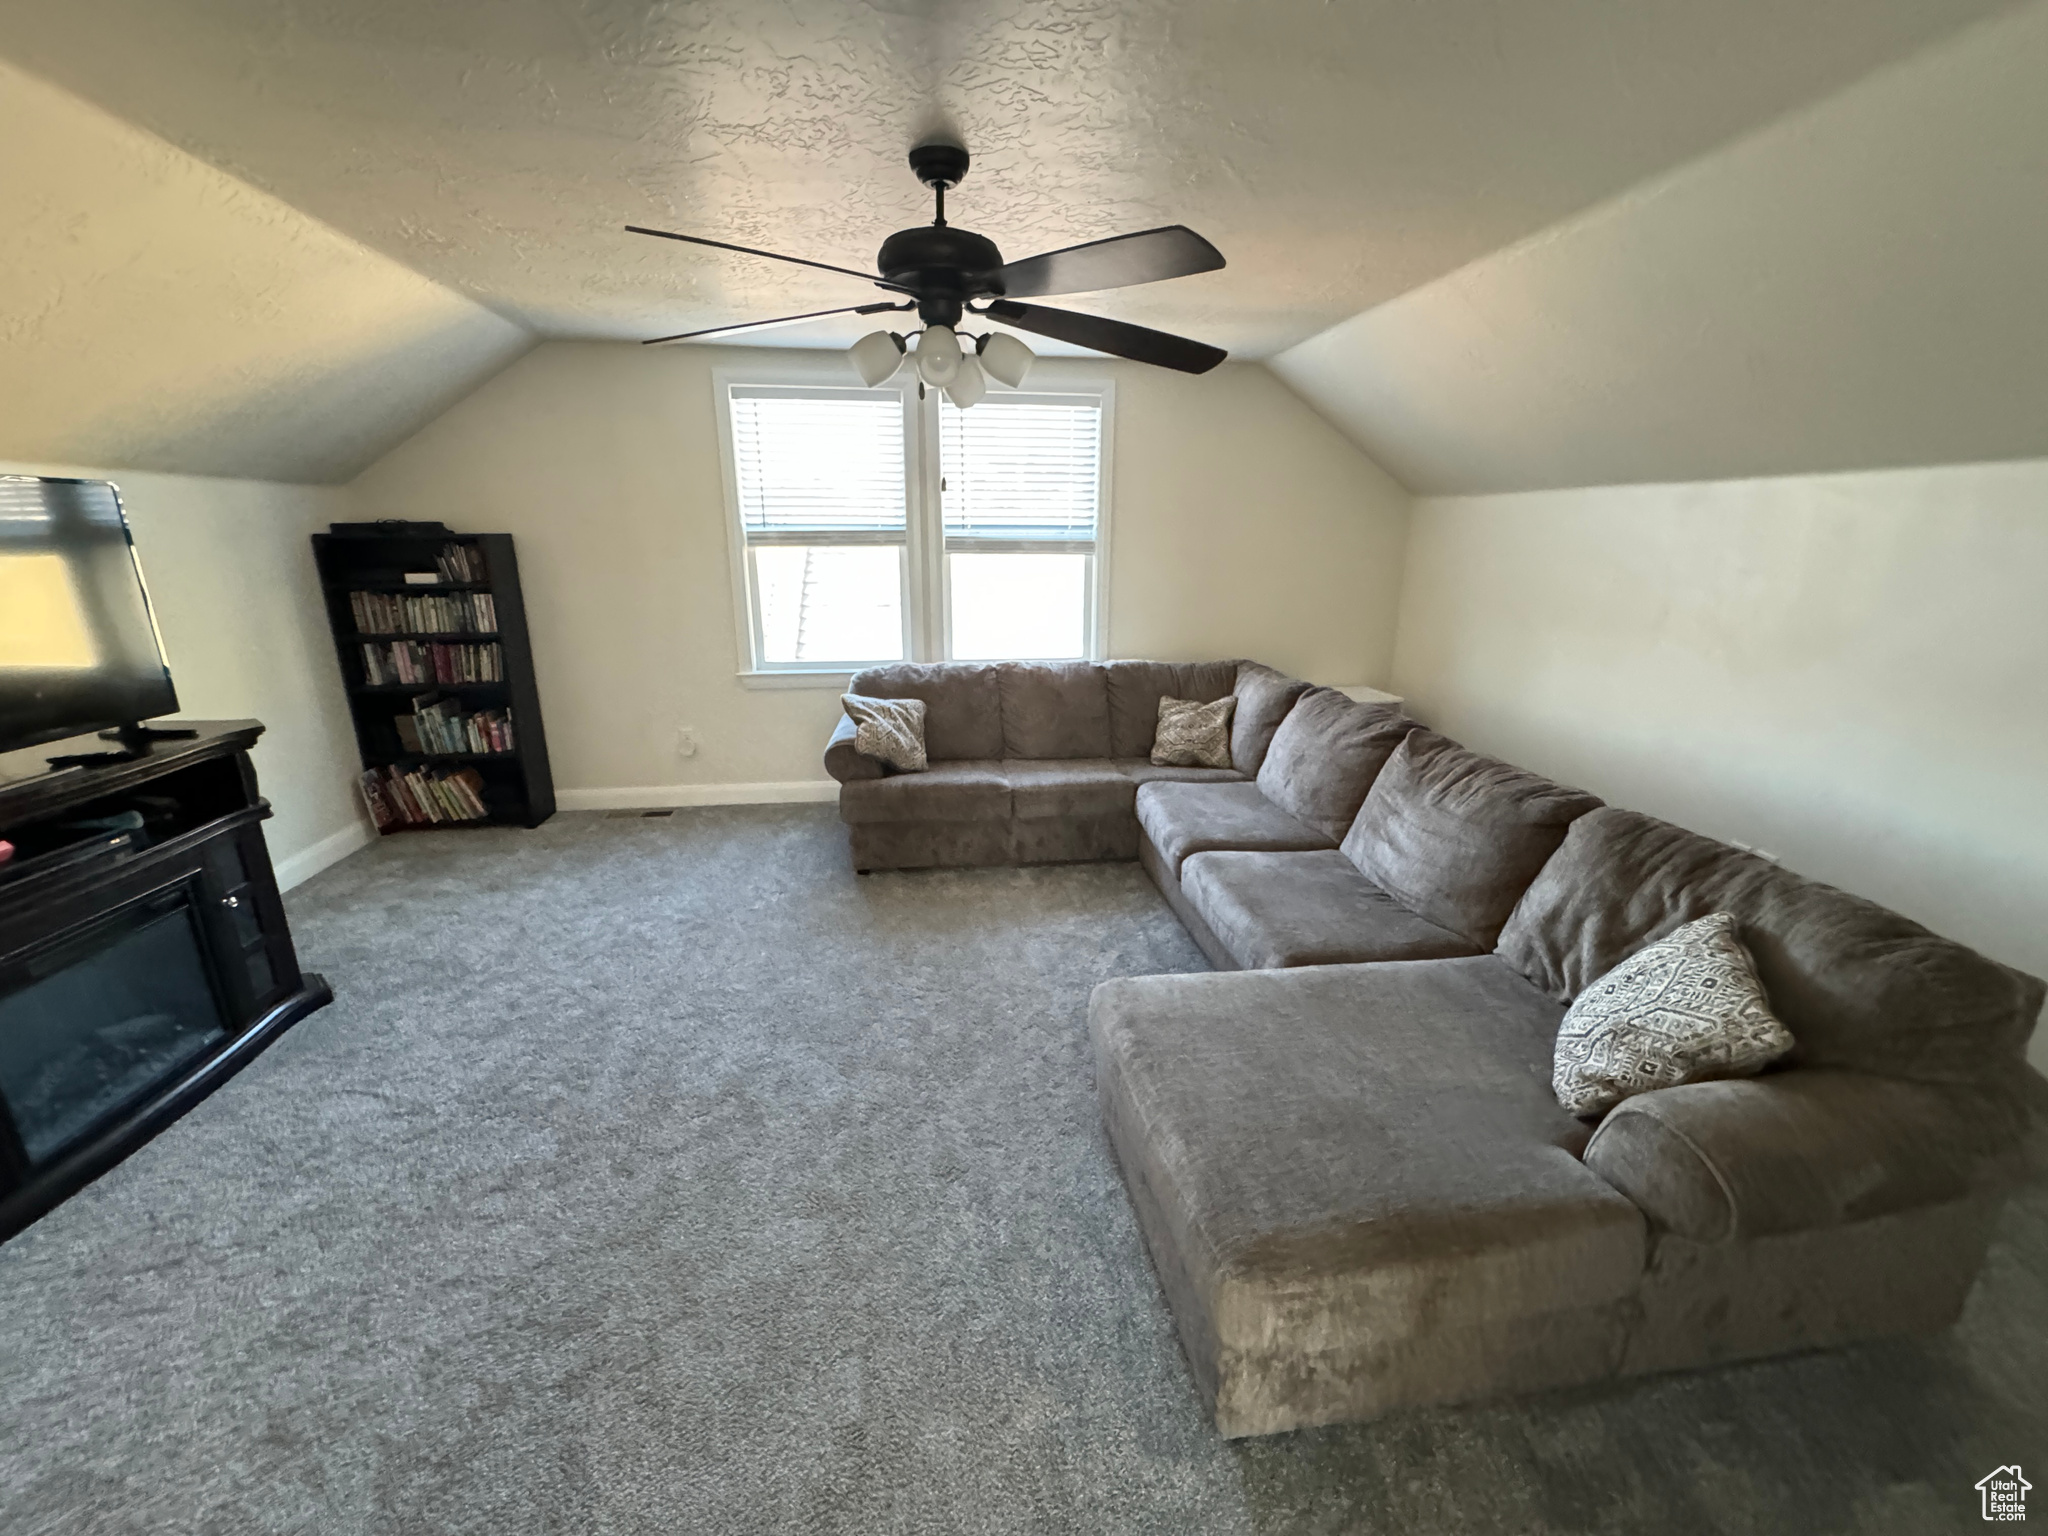 Living room featuring vaulted ceiling, ceiling fan, a textured ceiling, and carpet flooring